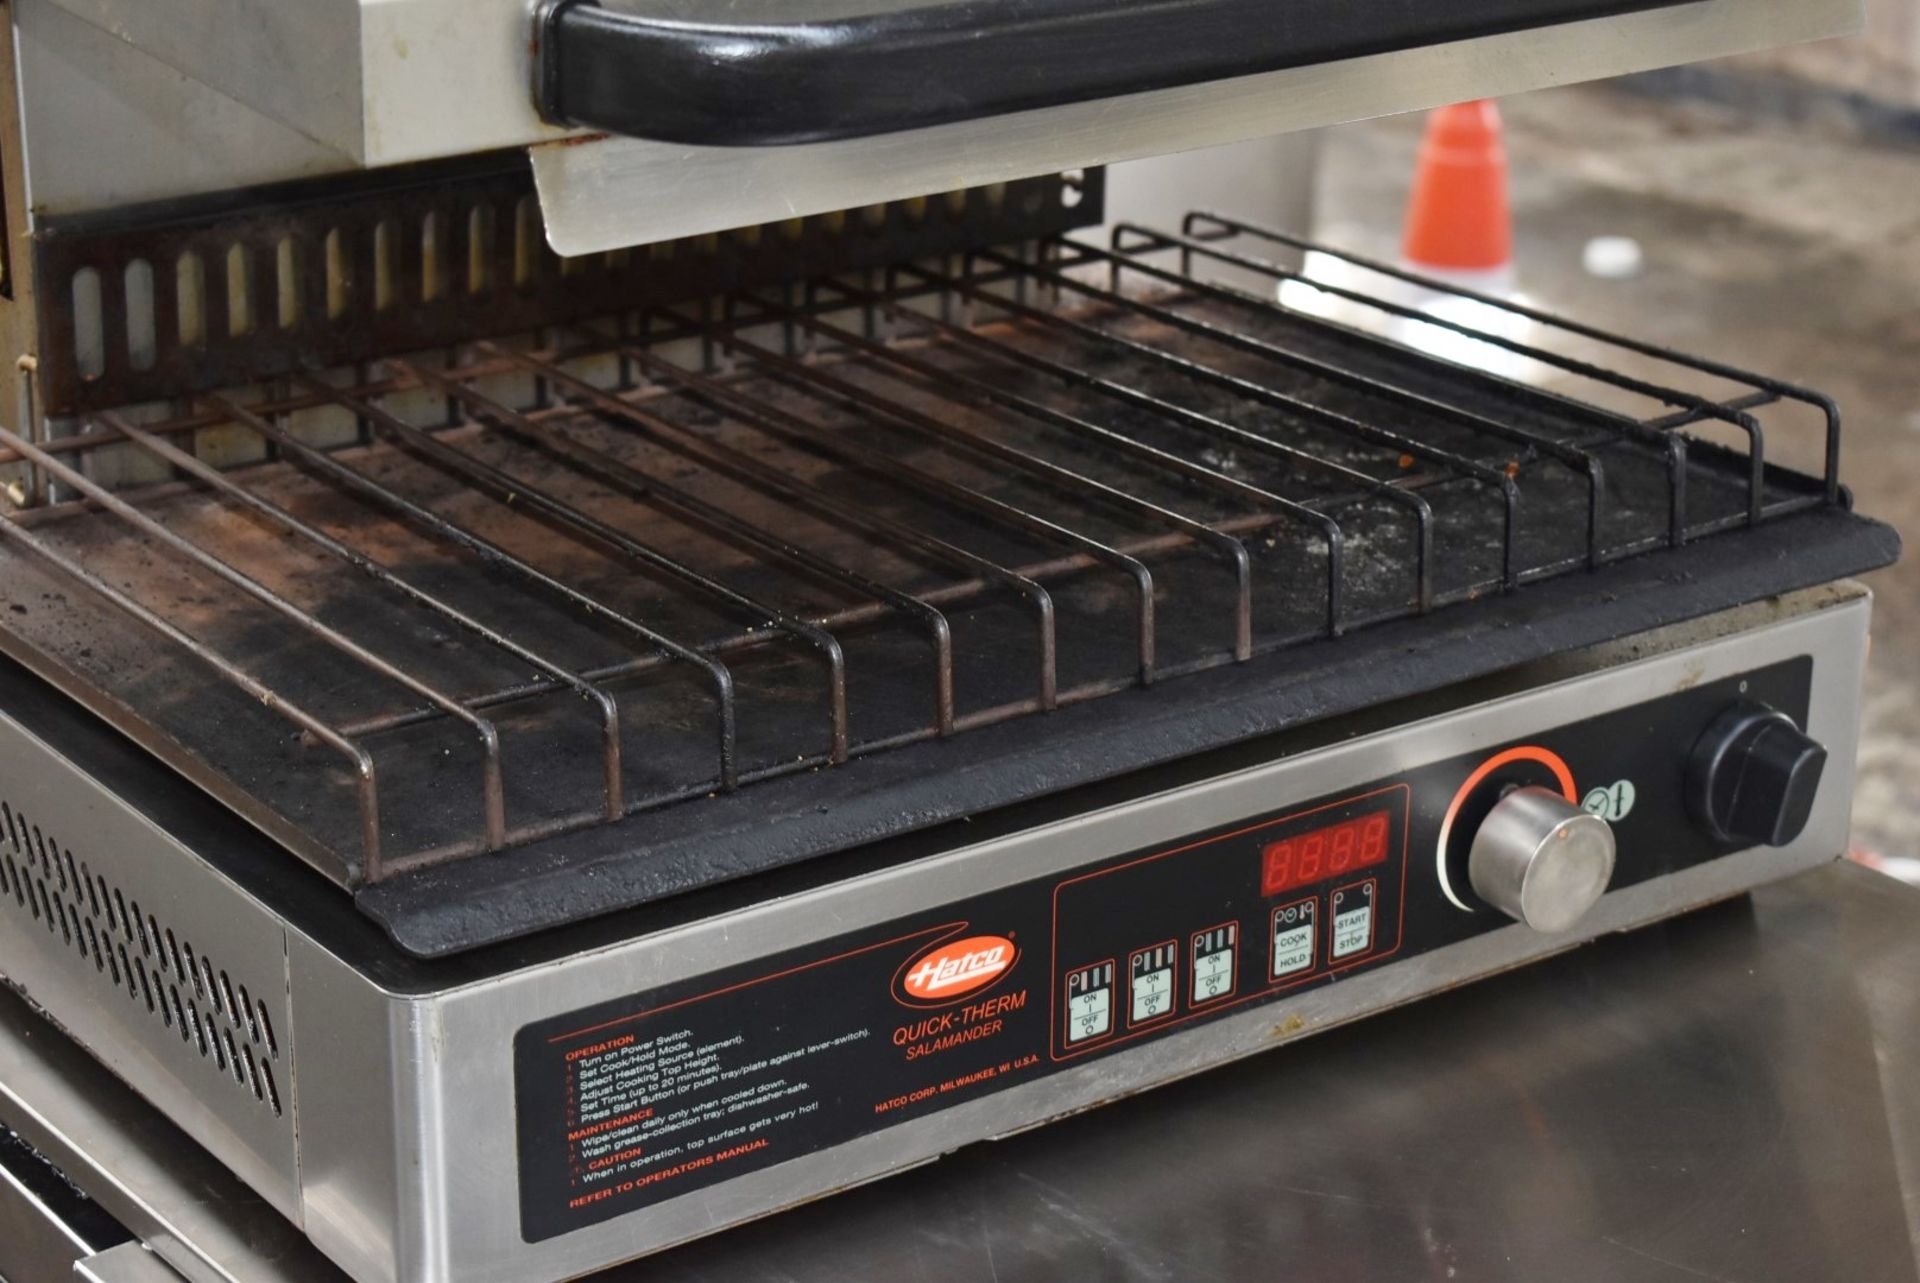 1 x Hatco Quick Therm Rise and Fall Salamander Grill - Model QTS00003  - 3 Phase - Recently - Image 4 of 9